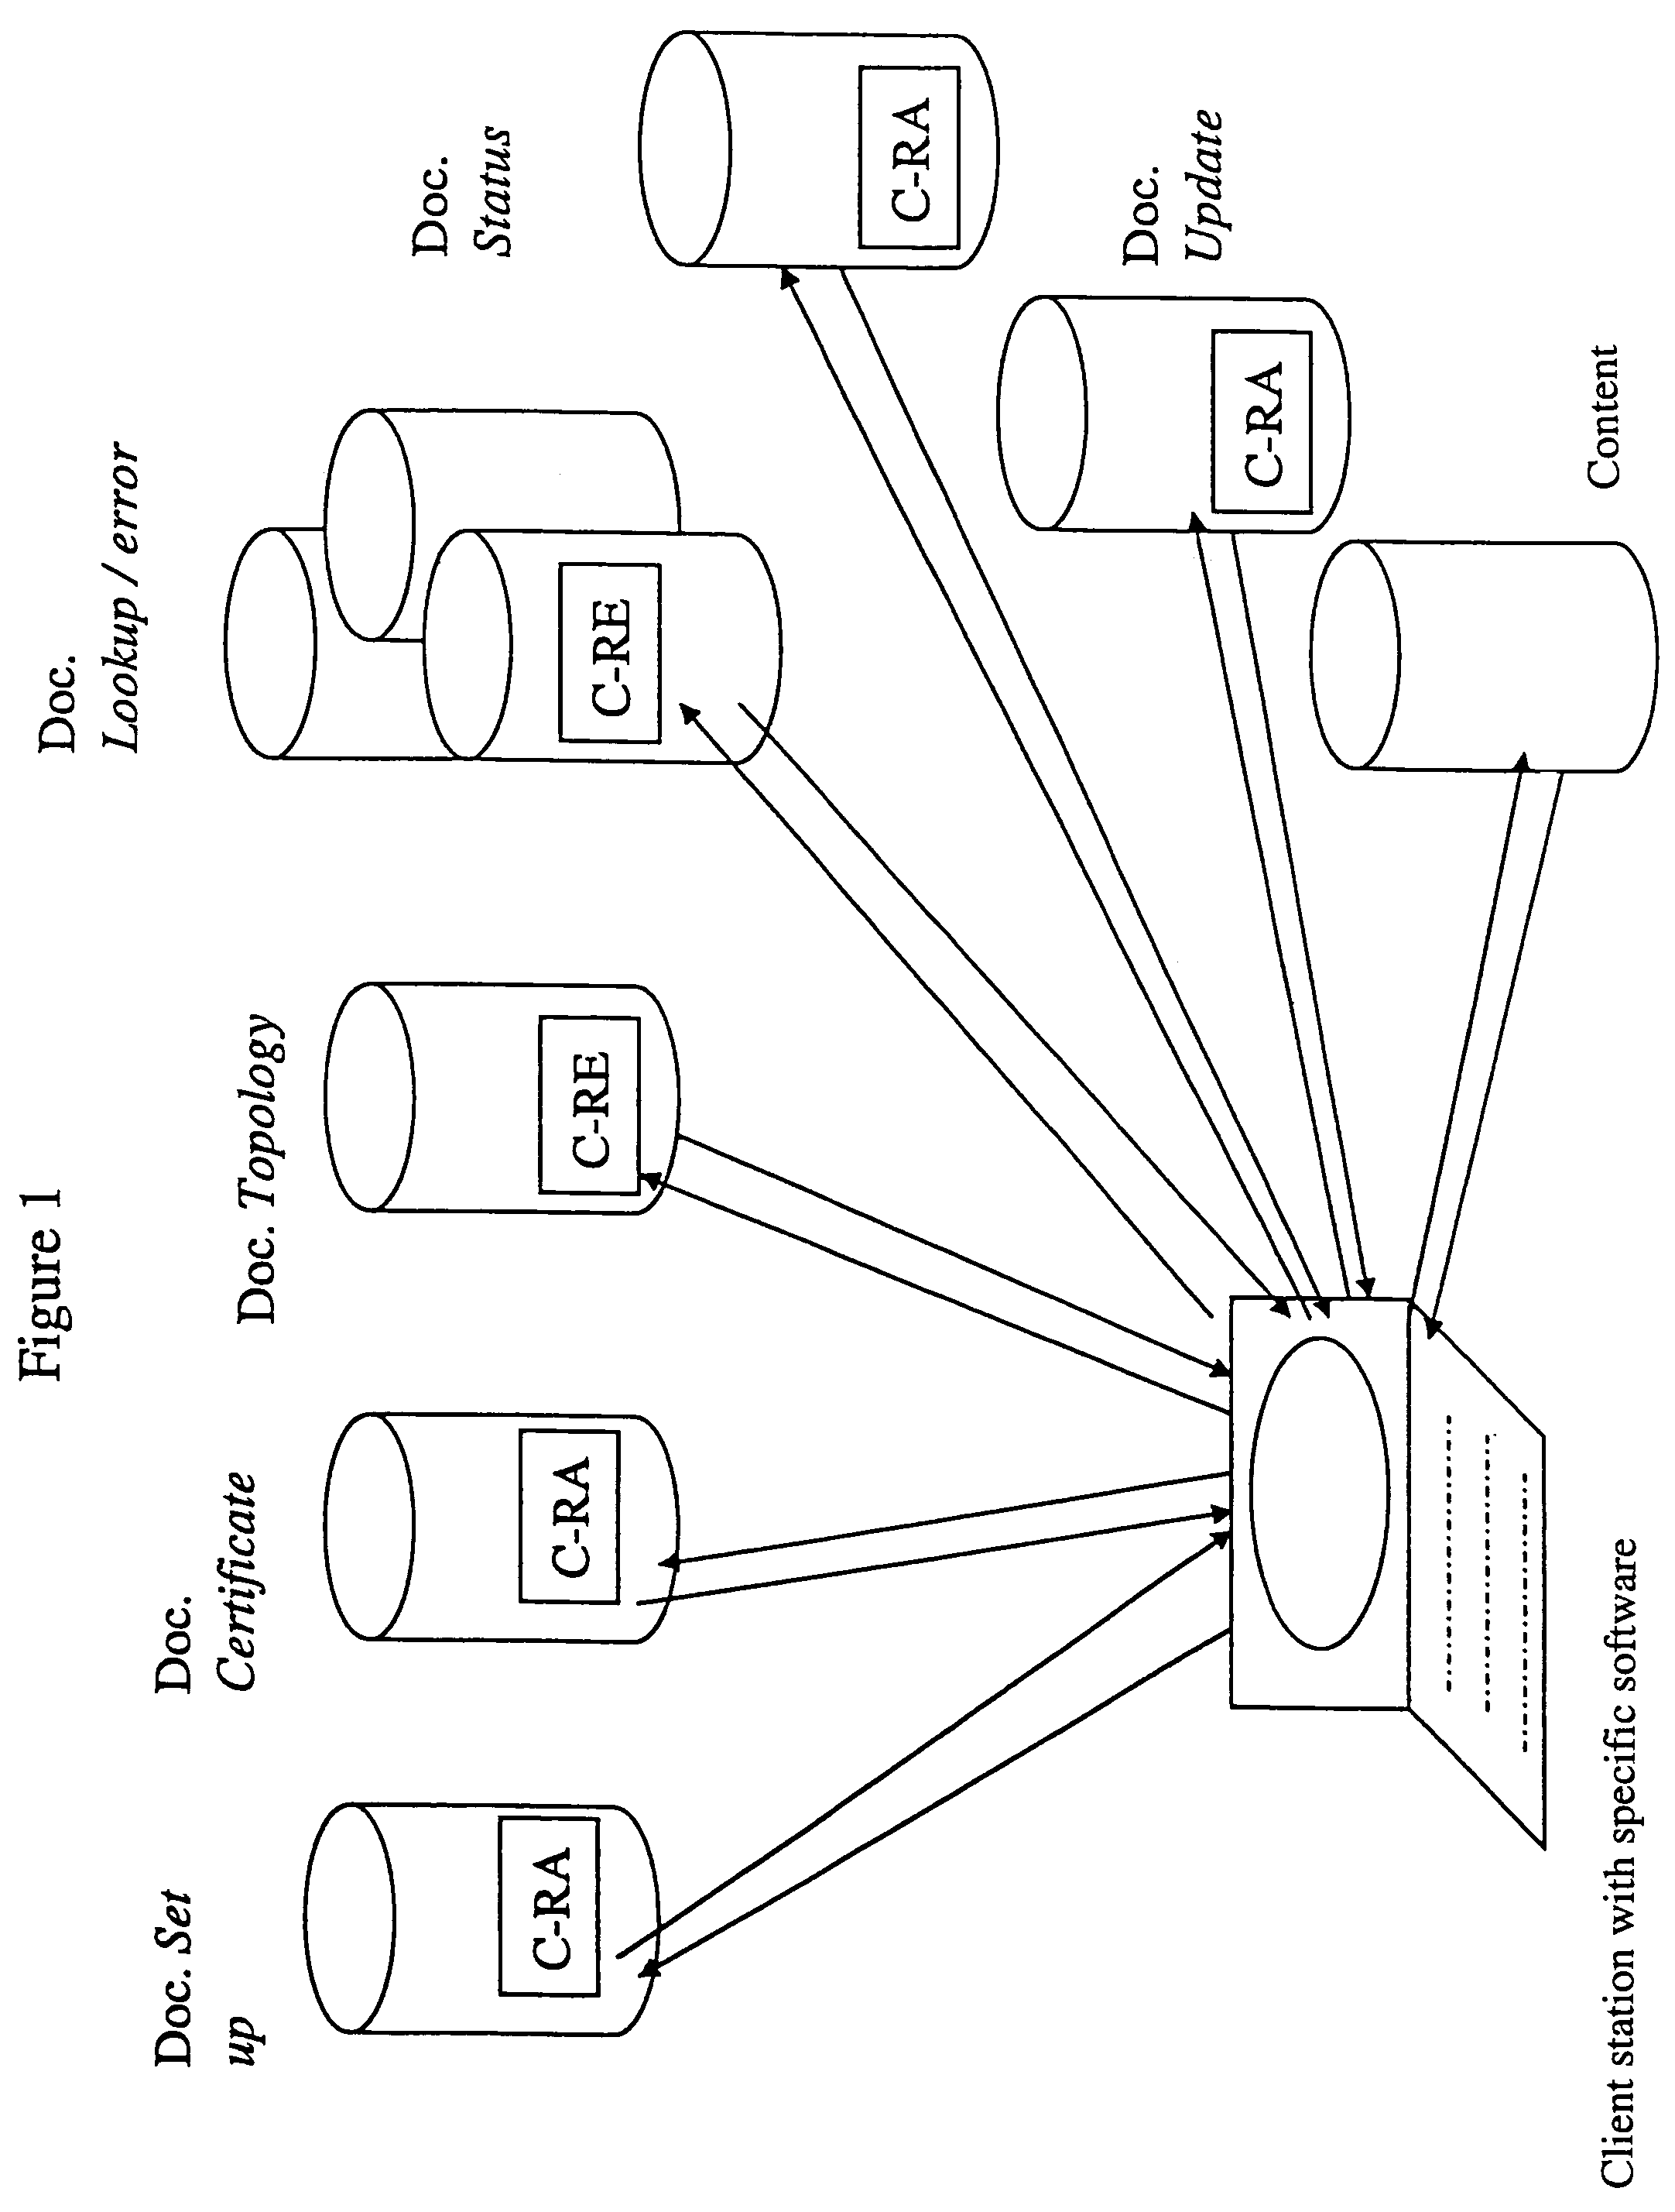 Method and system for operation of a computer network intended for the publication of content